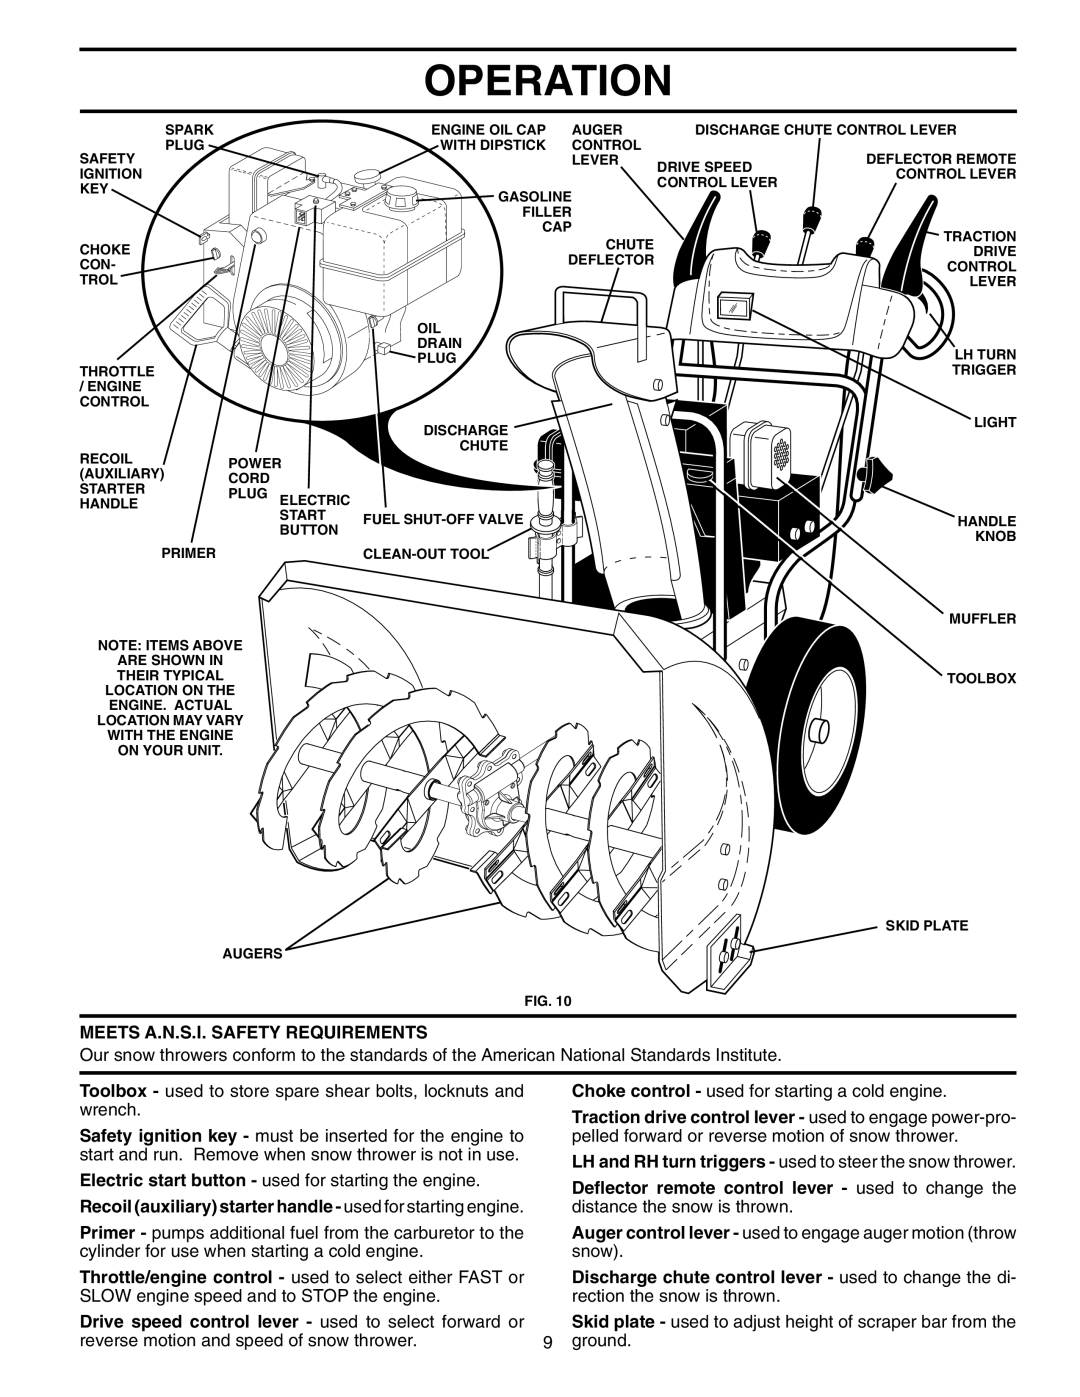 Husqvarna 927SBEXP owner manual Operation, Meets A.N.S.I. Safety Requirements 